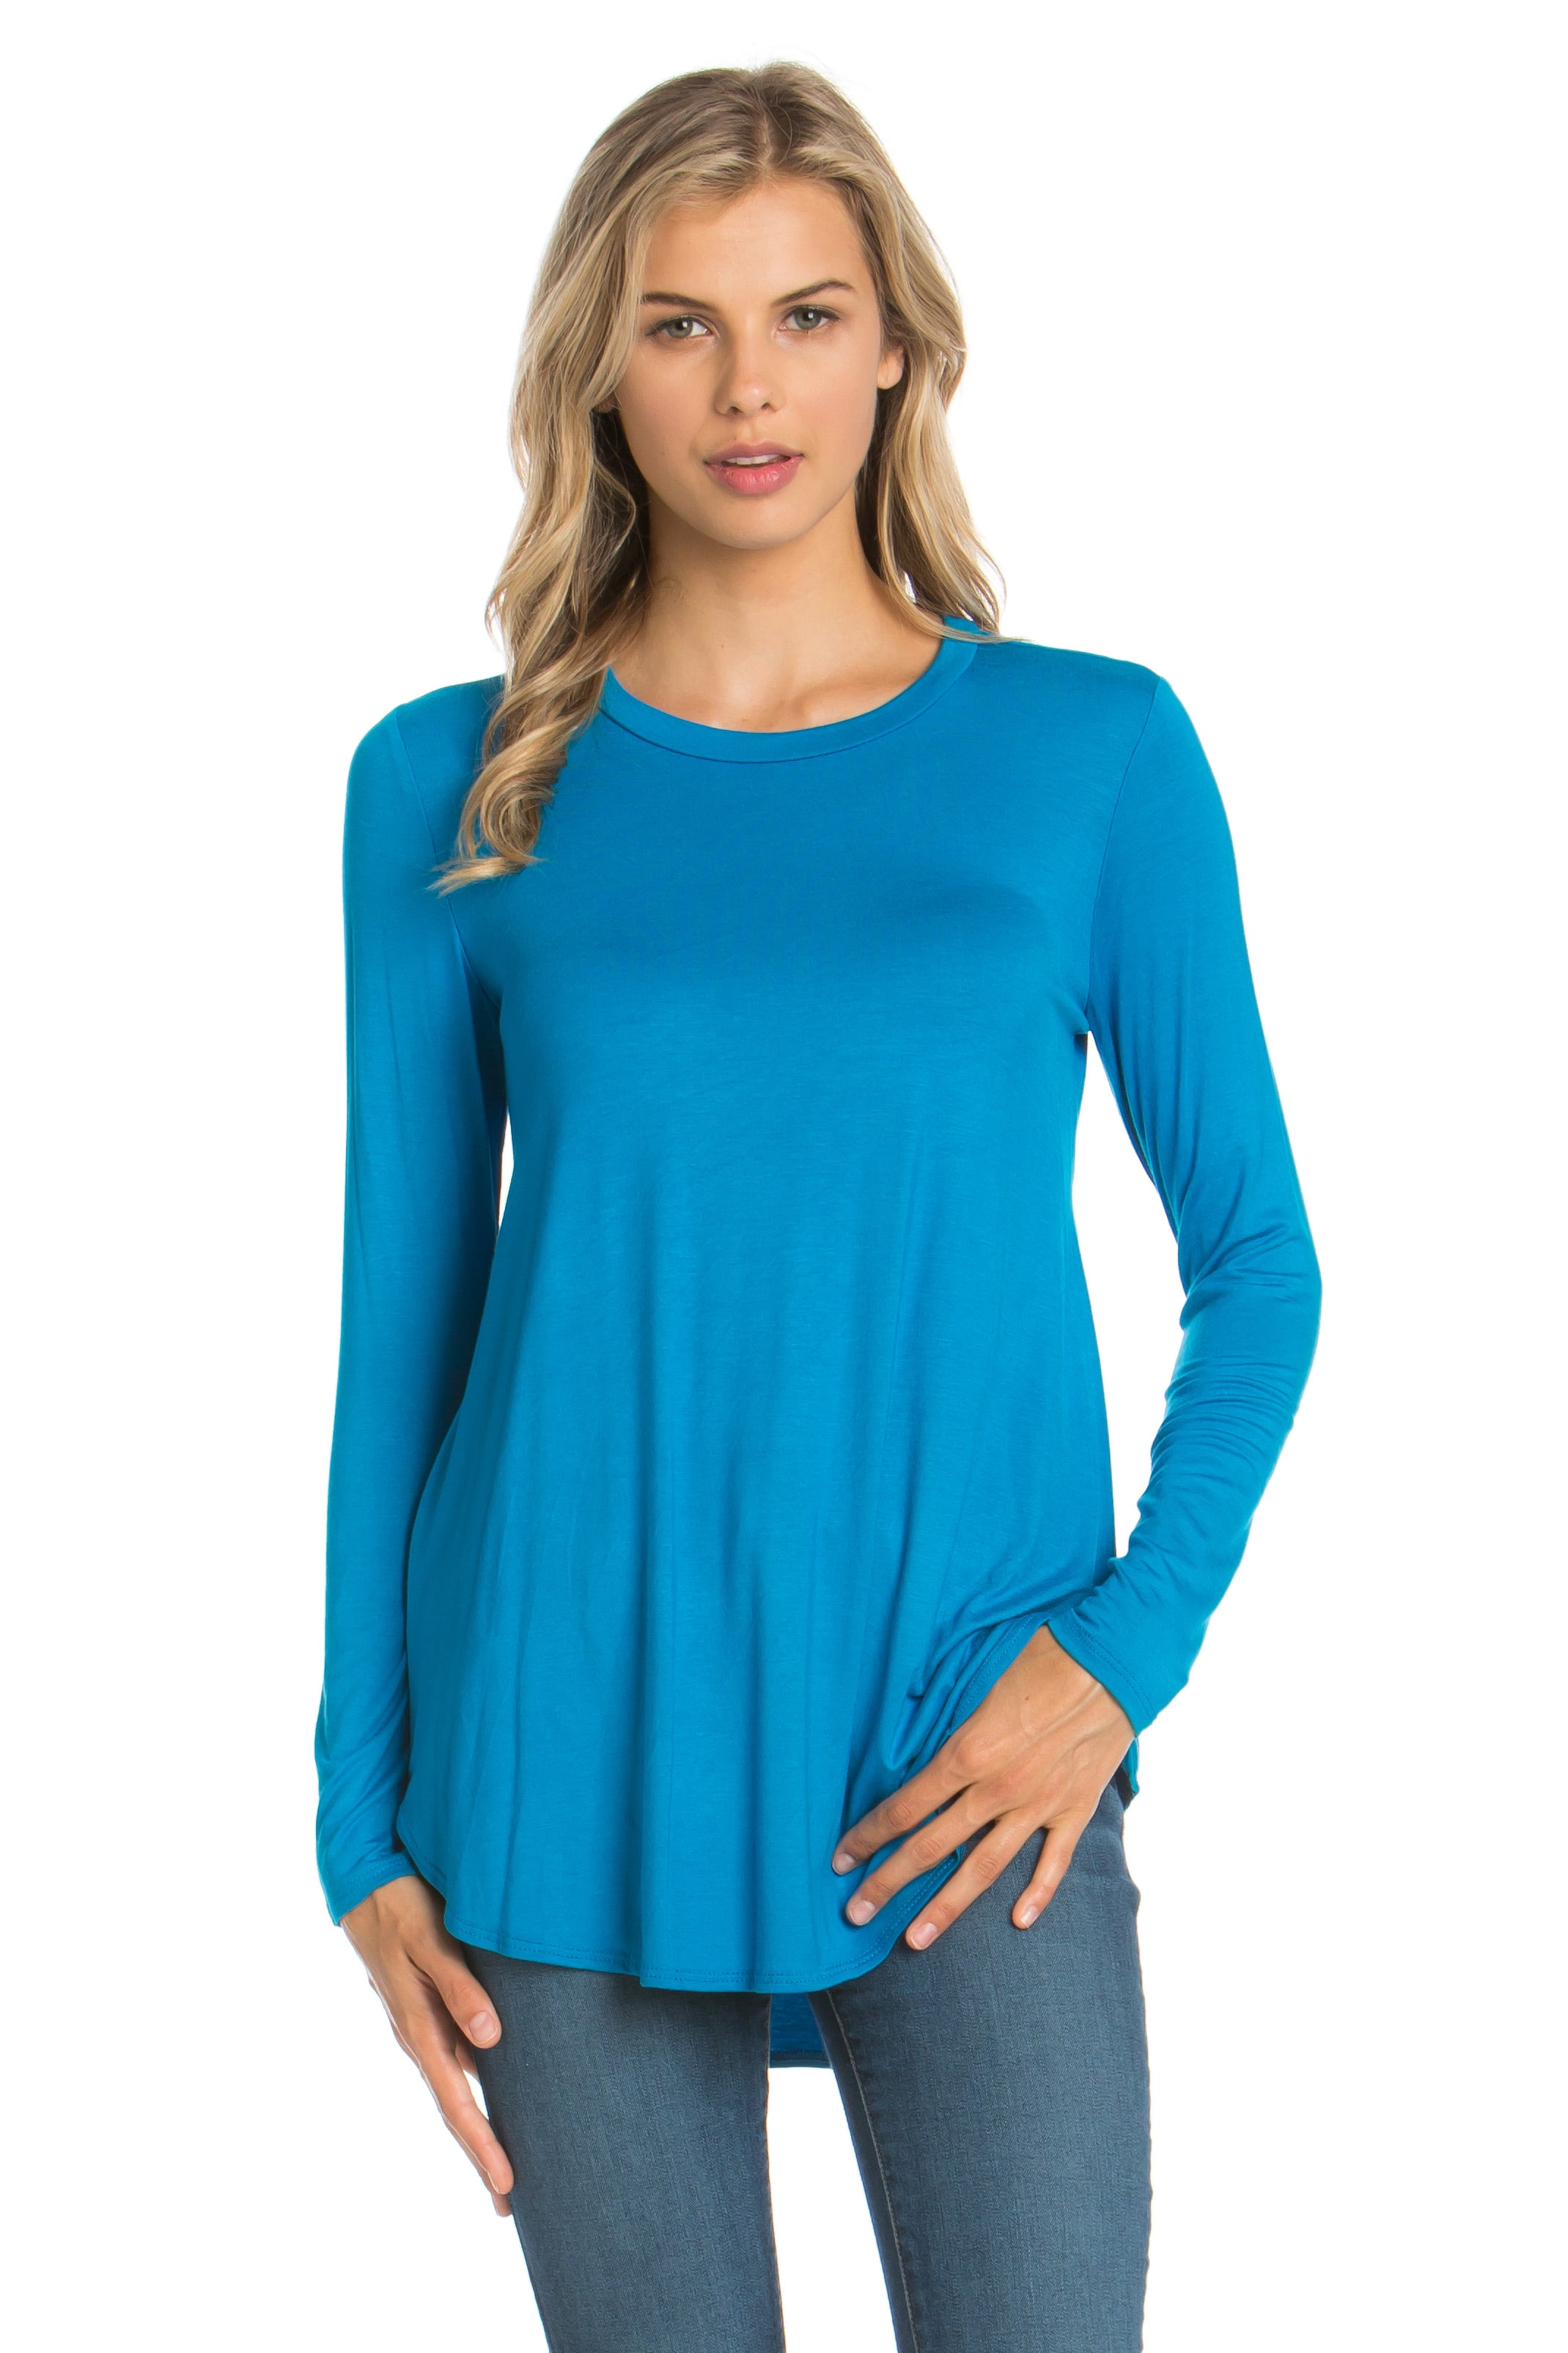 Azules Women's Long Sleeve Flowy Tunic - Cobalt - X-Large [Made in USA ...